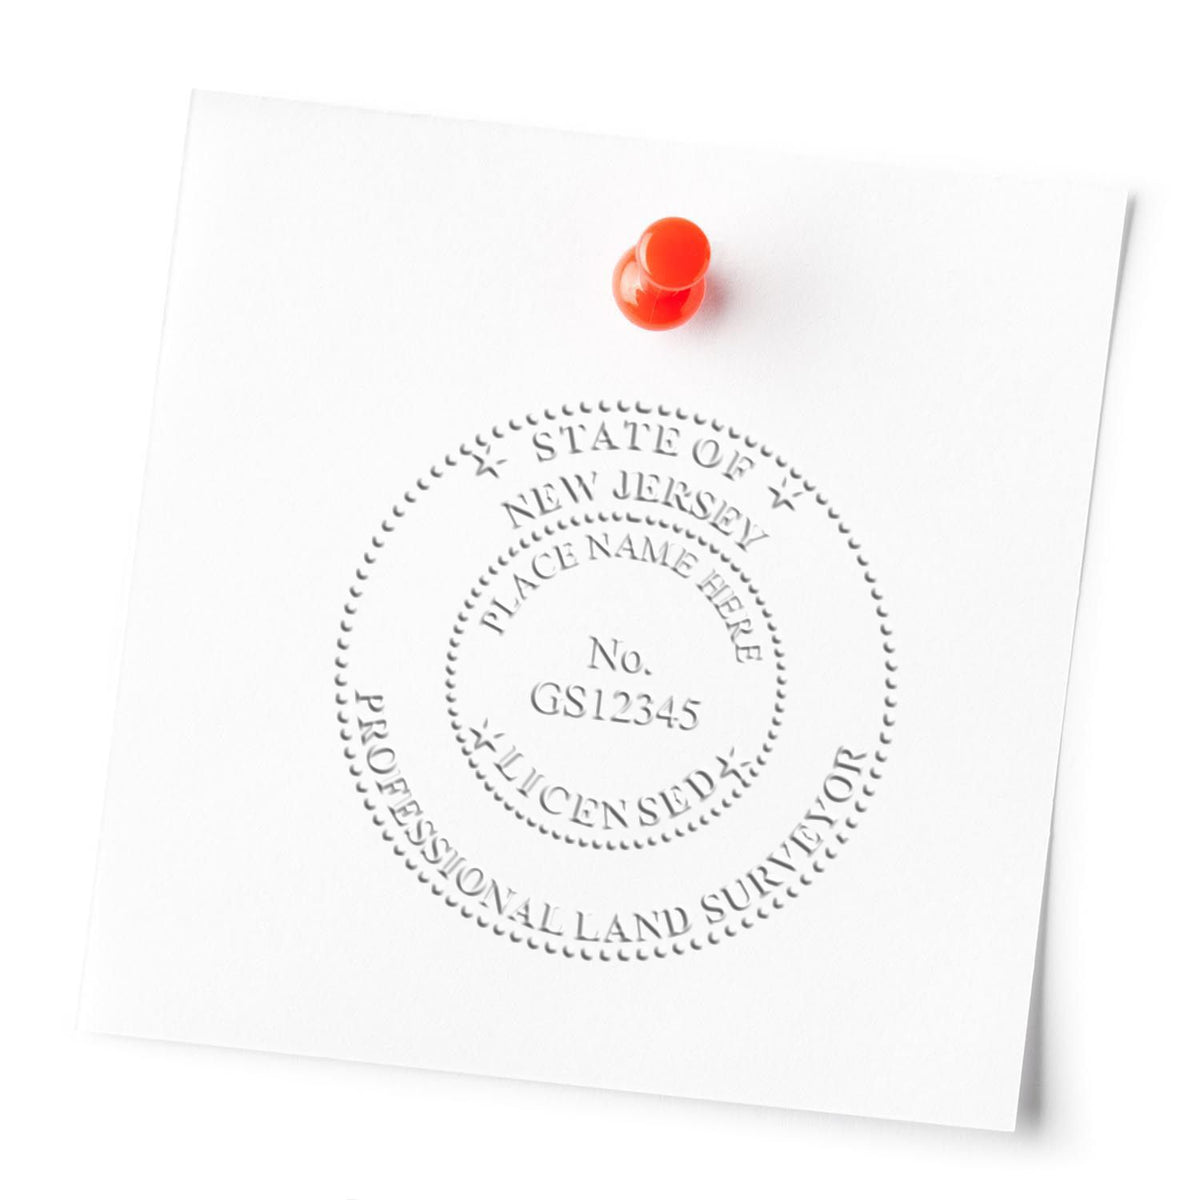 An in use photo of the Gift New Jersey Land Surveyor Seal showing a sample imprint on a cardstock